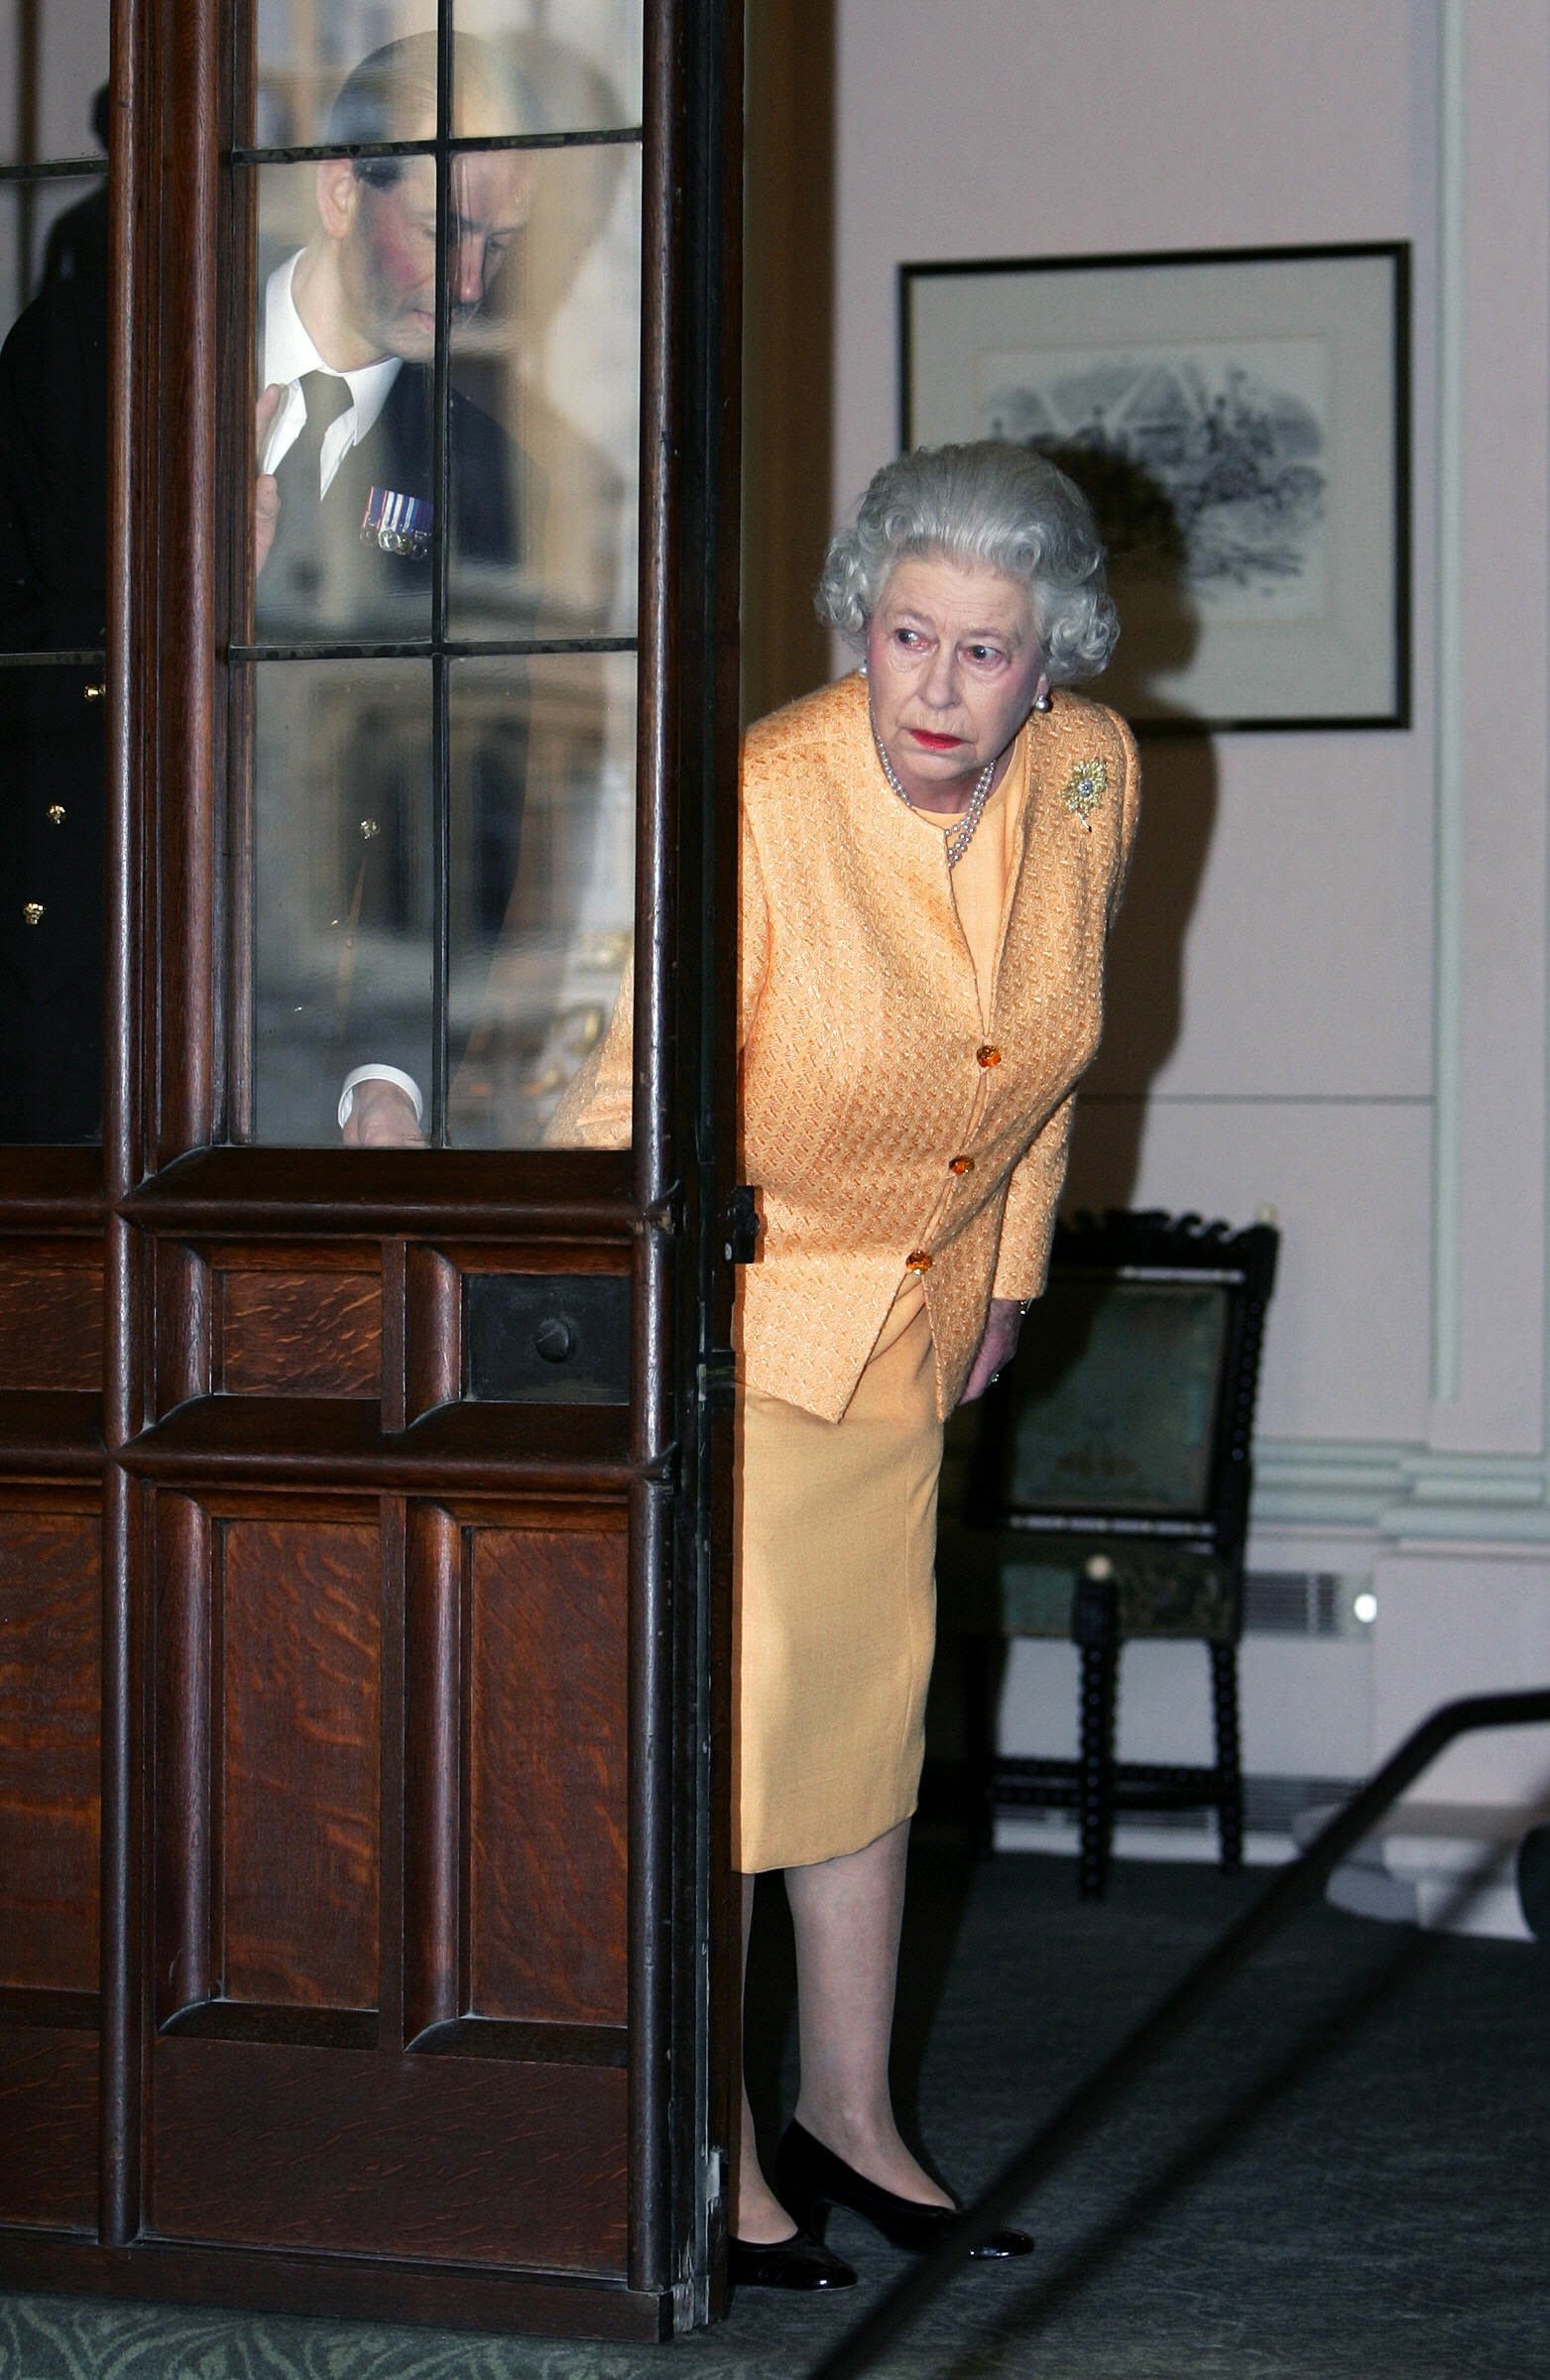 Queen Elizabeth II and her aide, Paul Whybrew, peer around a door to see if a car has pulled up